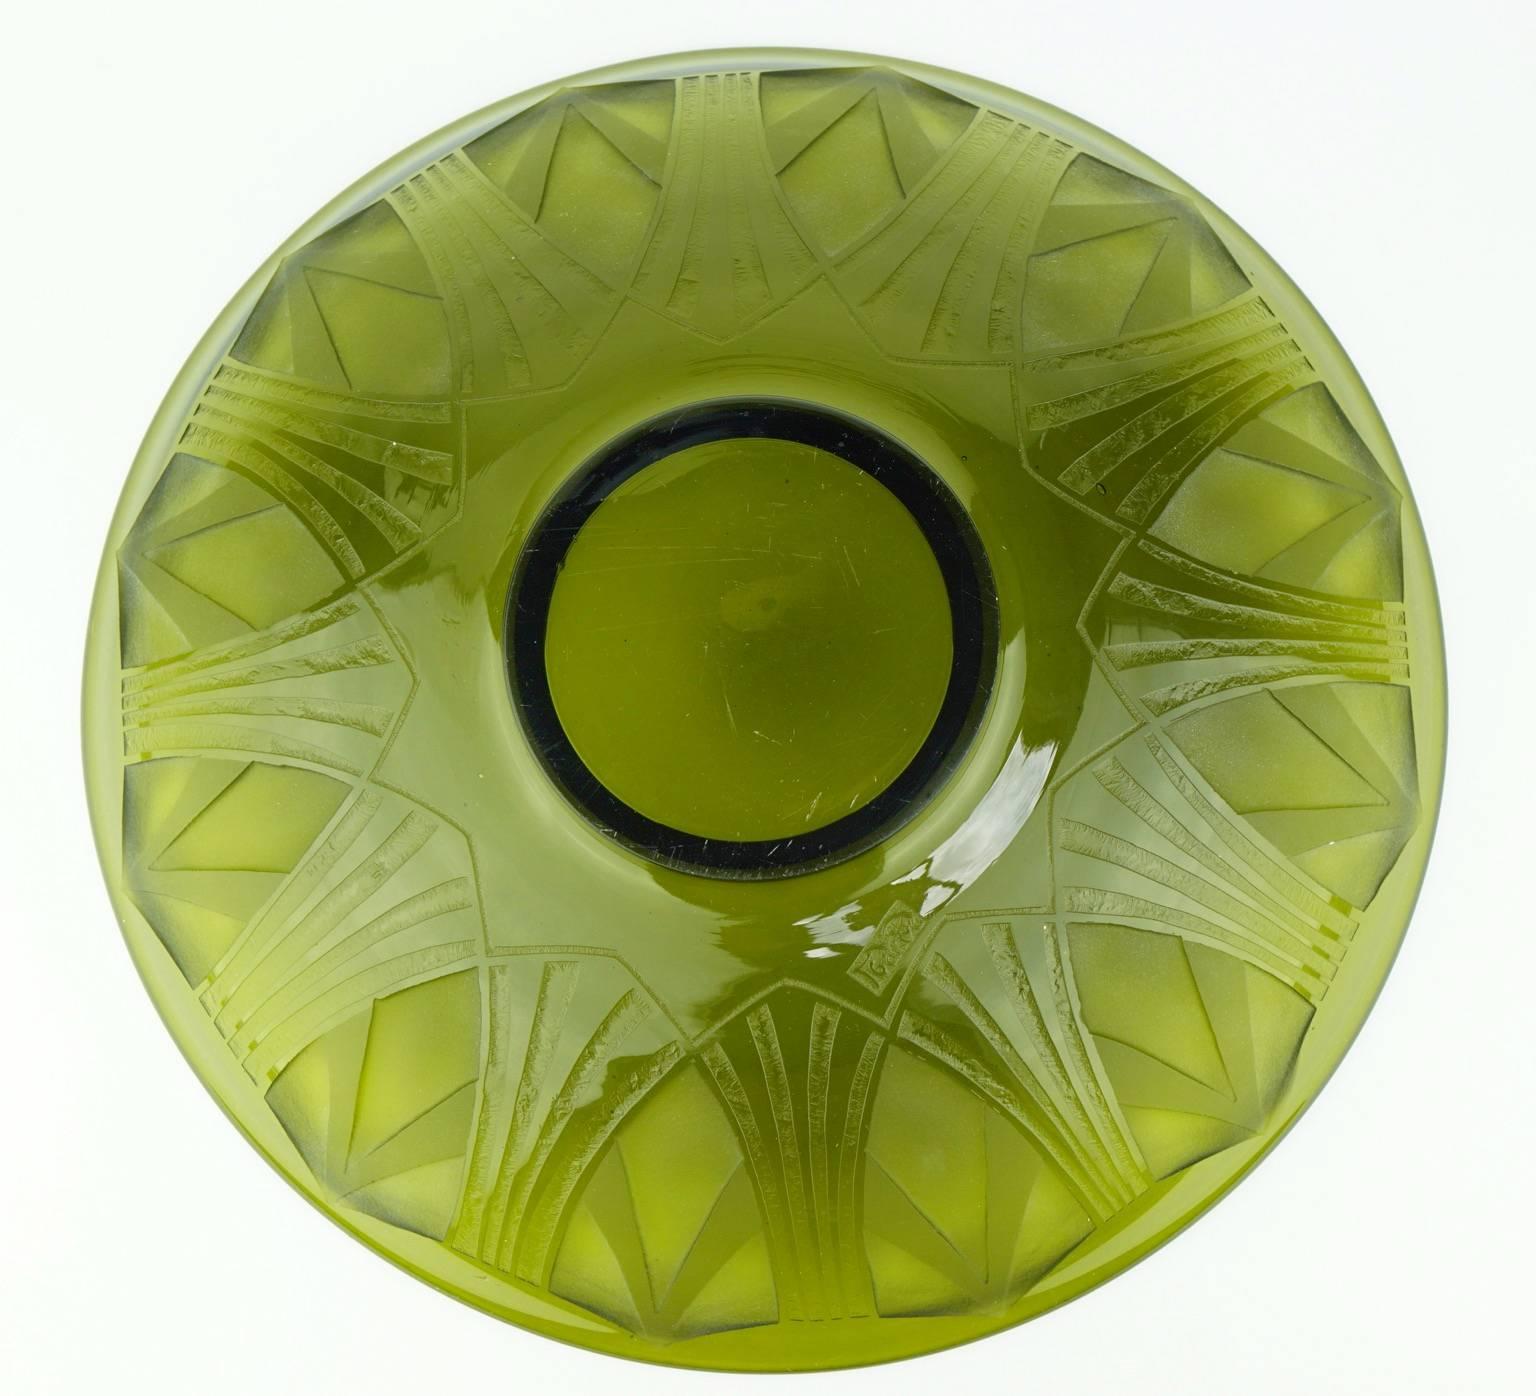 French Art Deco Legras Acid-Etched Glass Coupe For Sale 3